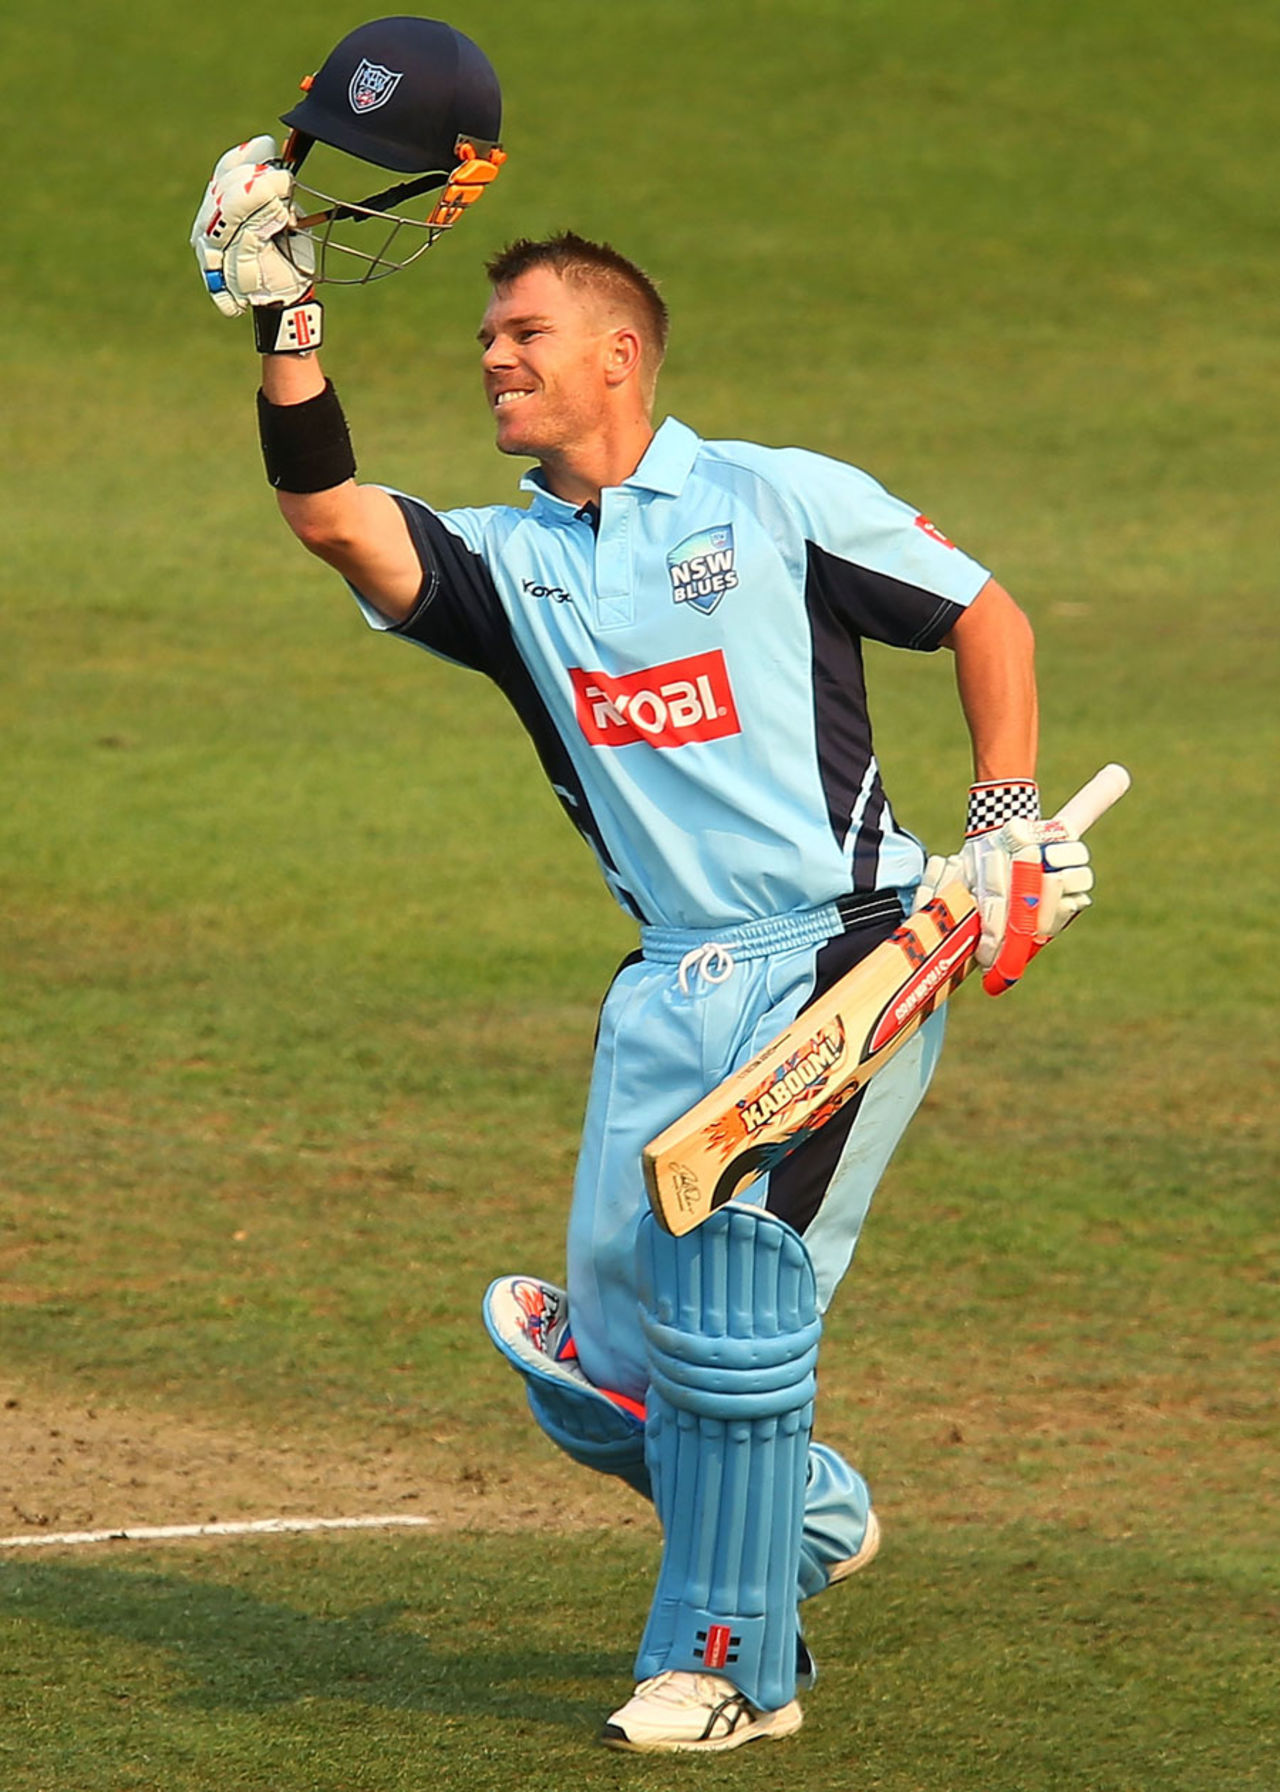 David Warner celebrates his second successive limited-overs hundred, New South Wales v Victoria, Ryobi One-Day Cup, Sydney, October 20, 2013